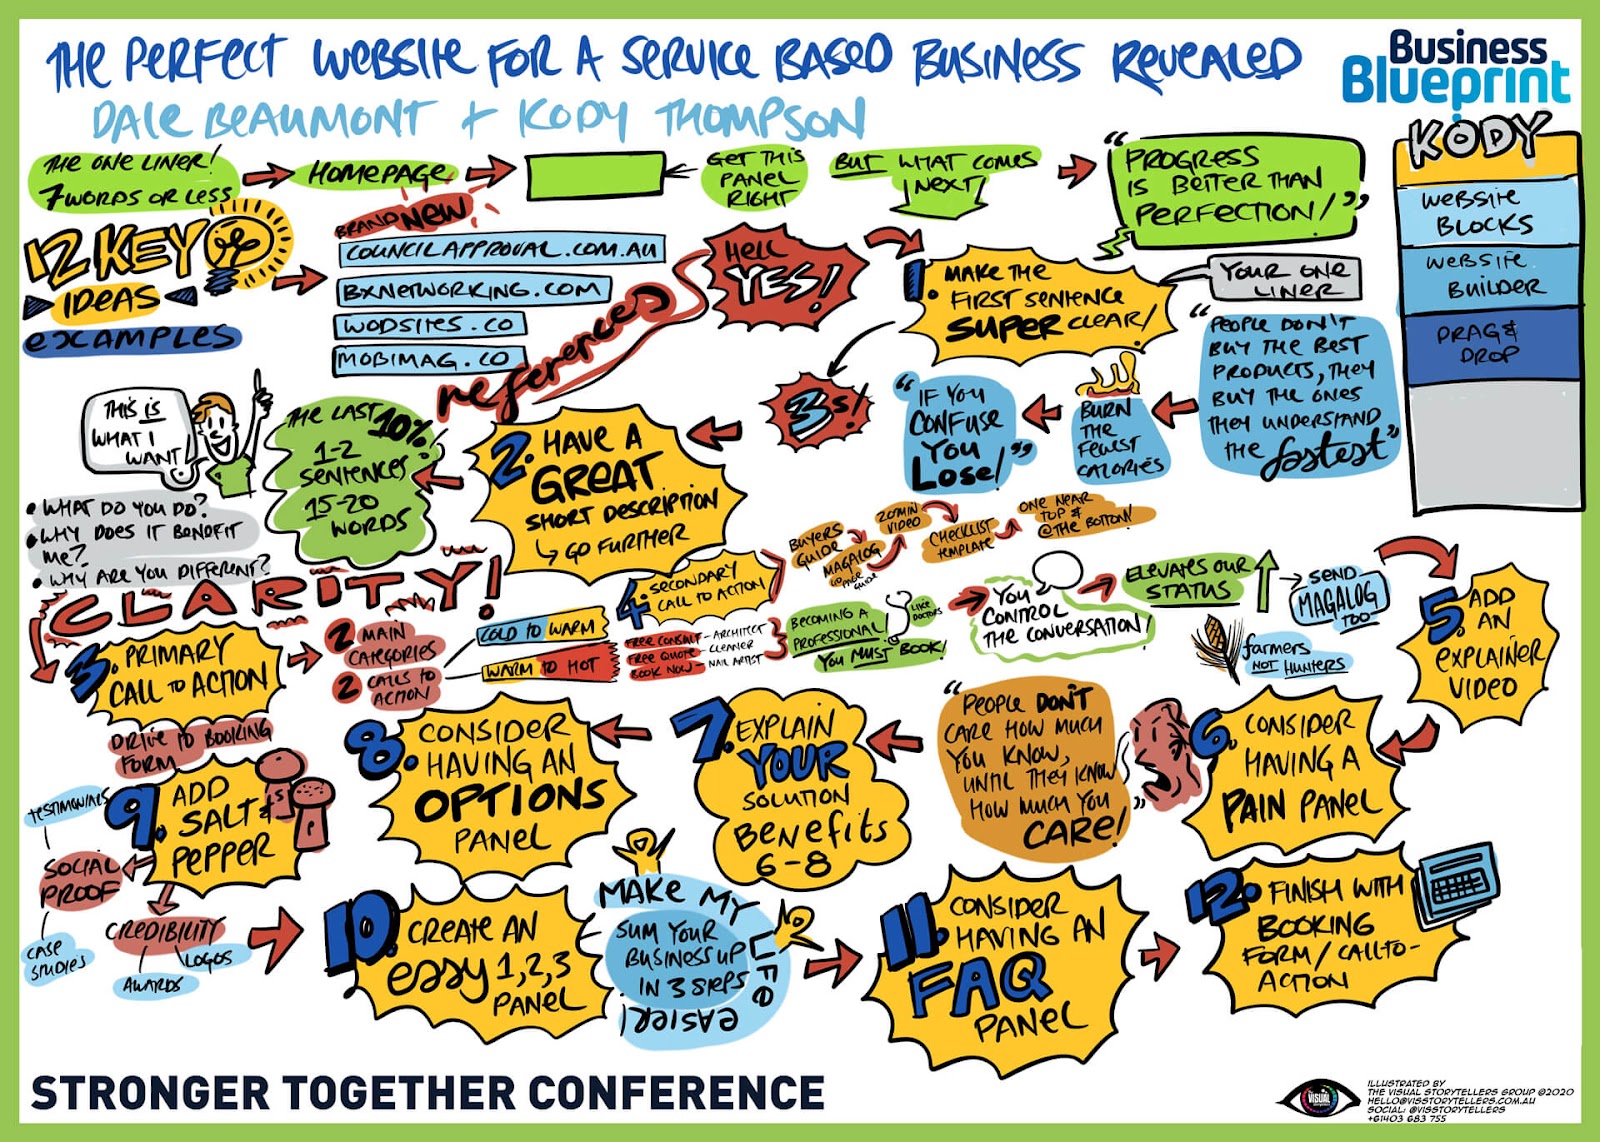 Graphic recording or visual notes taken virtually at the business blueprint conference. Digital graphic recording live virtually.